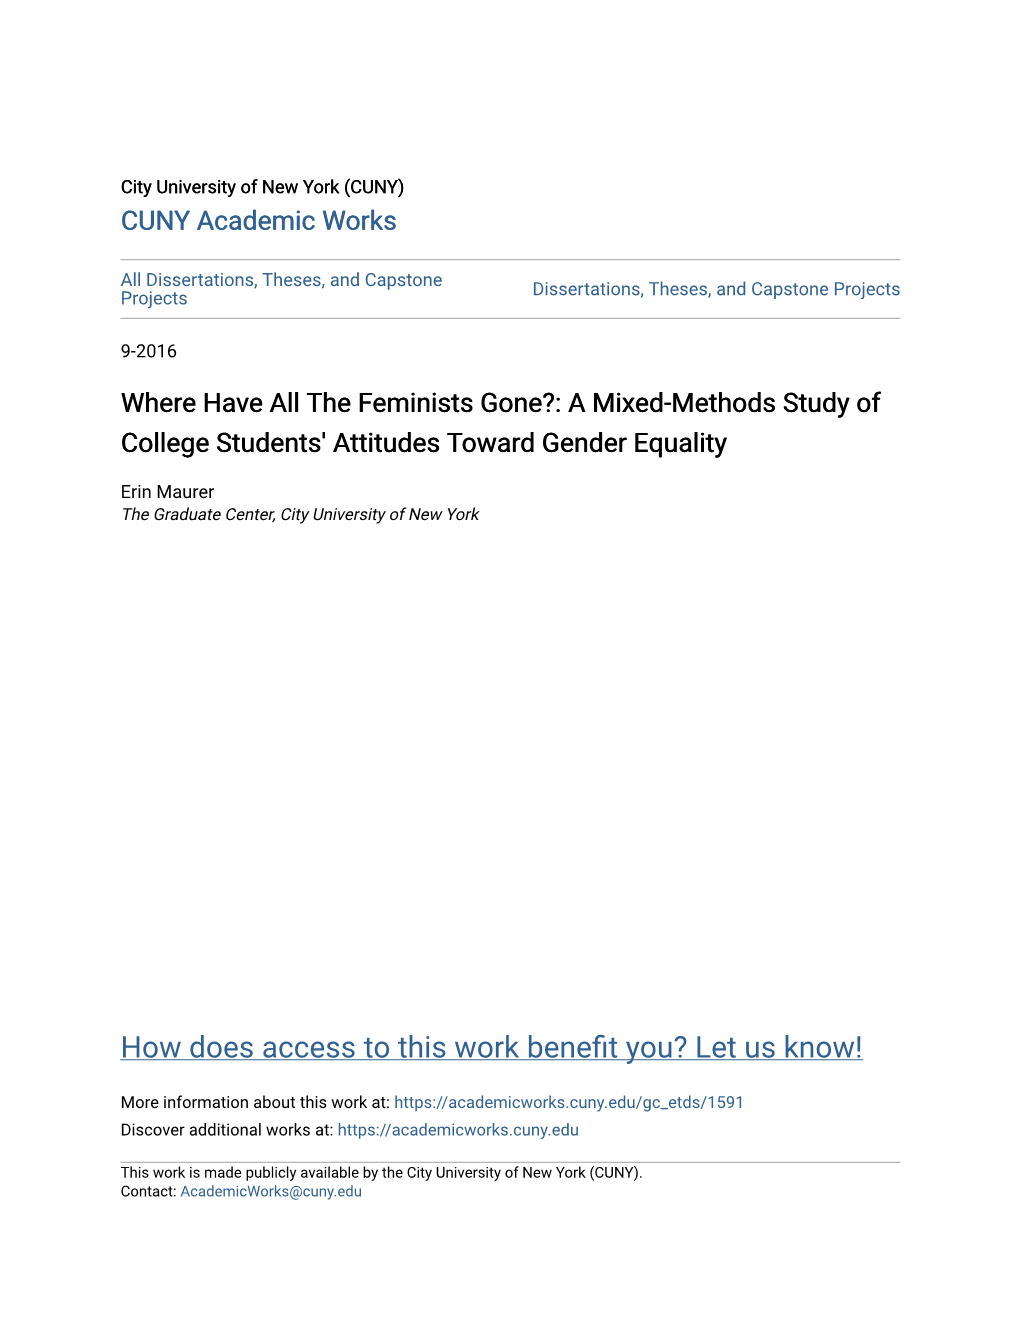 Where Have All the Feminists Gone?: a Mixed-Methods Study of College Students' Attitudes Toward Gender Equality